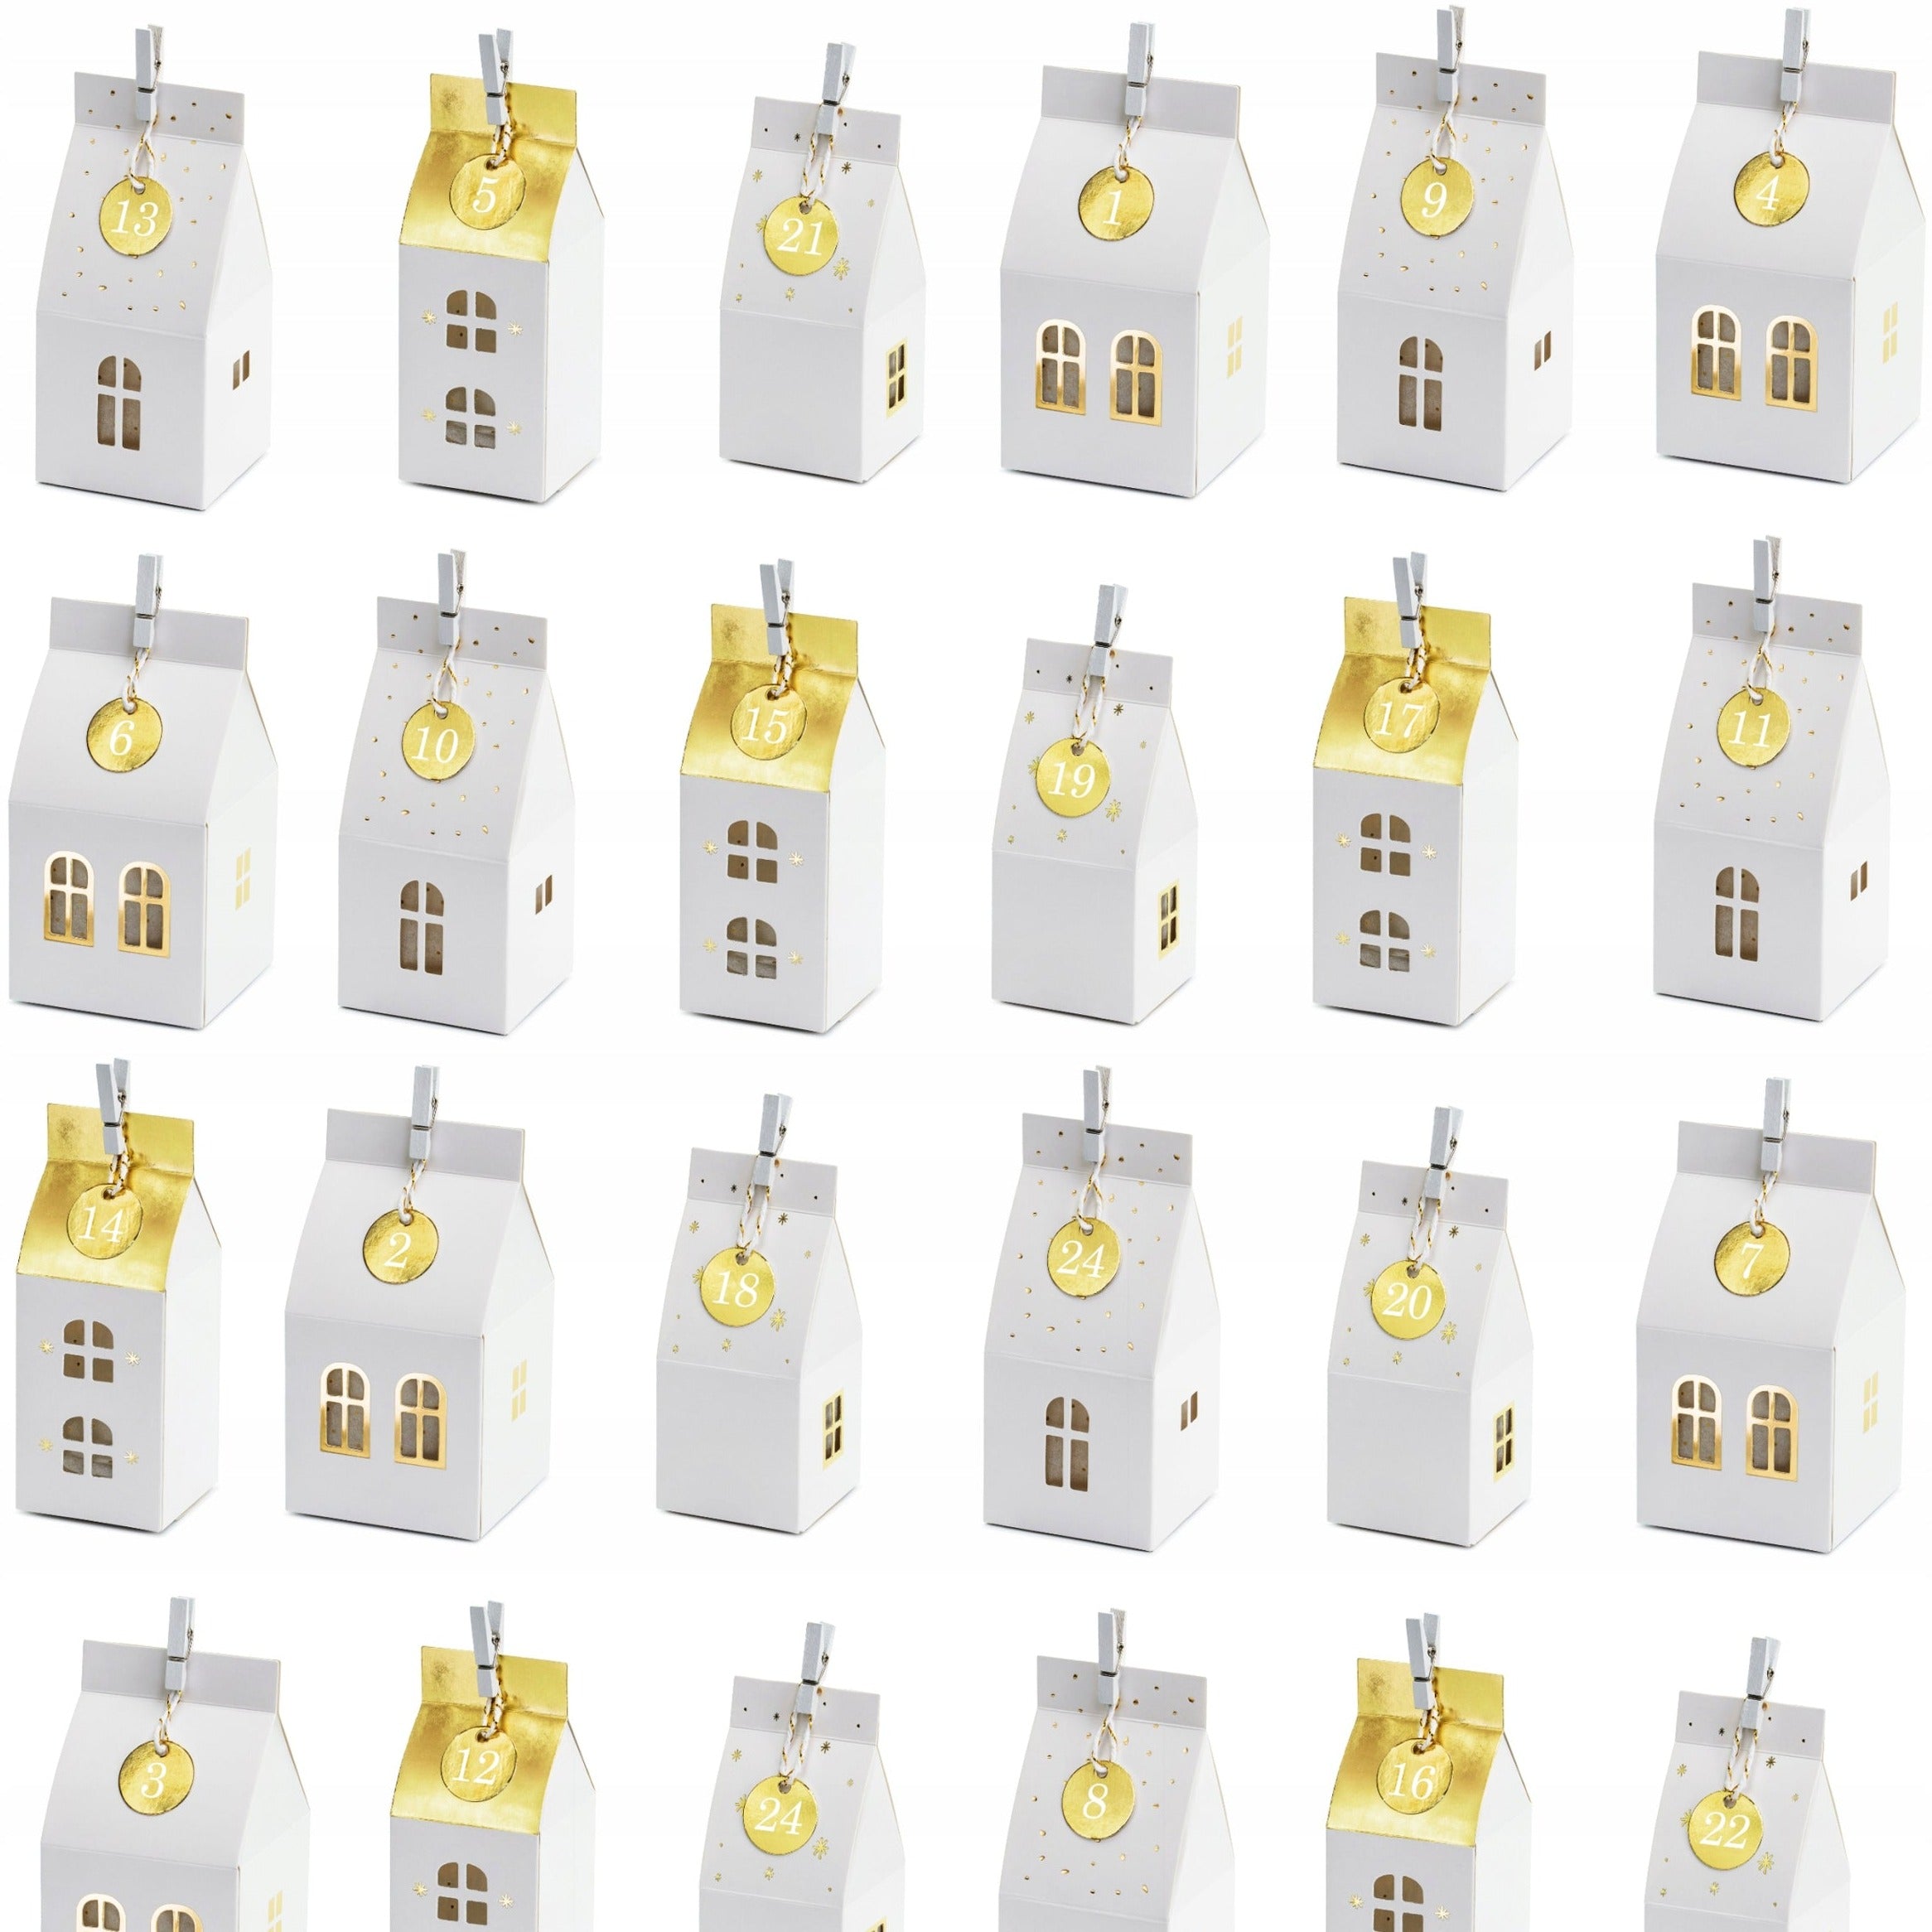 PartyDeco: Boxes for Advent Calendar White and golden houses